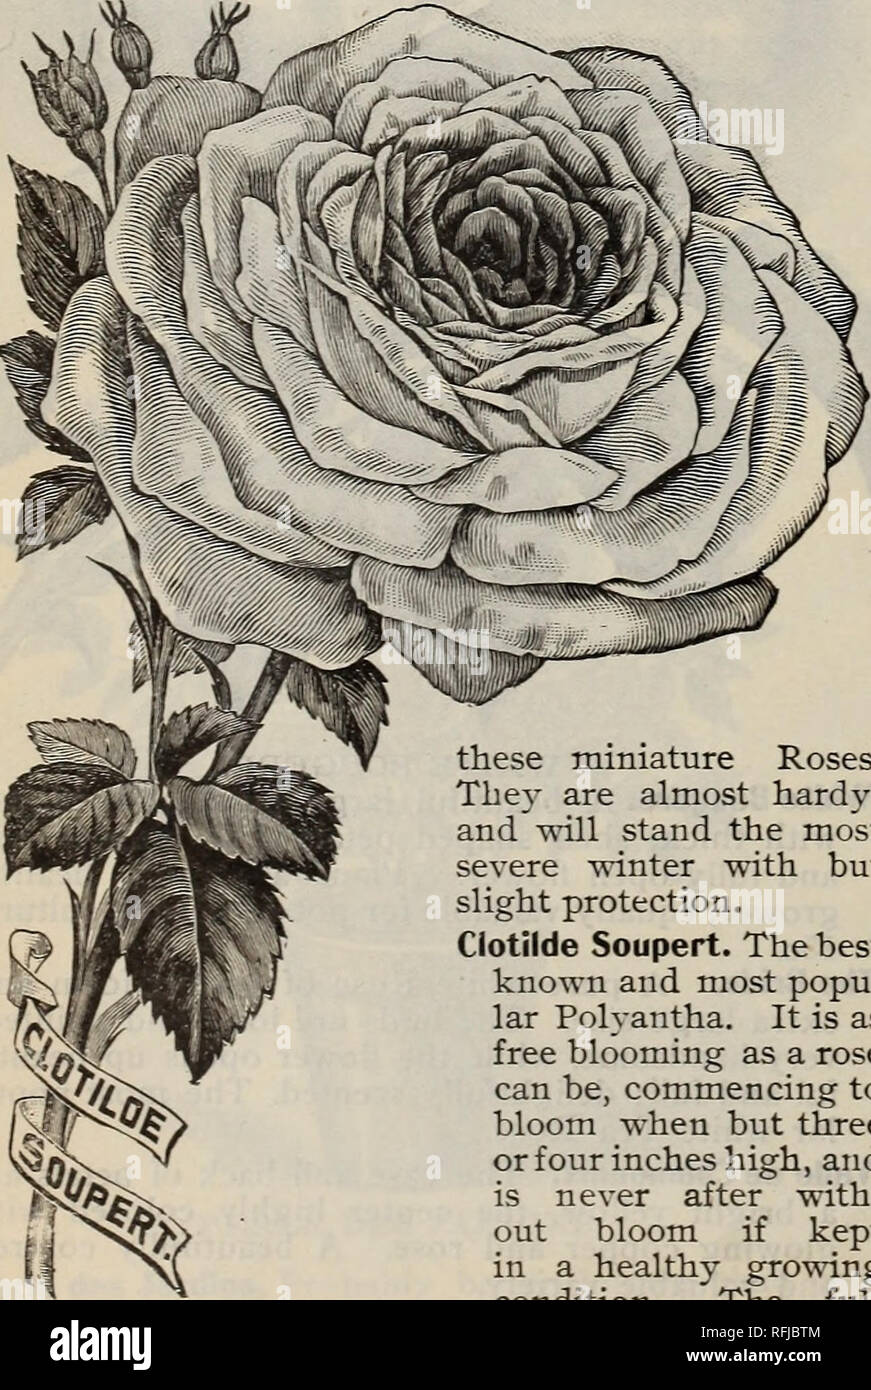 . Spring 1899. Nursery stock Ohio Catalogs; Vegetables Seeds Catalogs; Flowers Catalogs; Bulbs (Plants) Catalogs; Plants, Ornamental Catalogs; Fruit trees Seedlings Catalogs; Fruit Catalogs. The Queen. A beautiful, pure white, free-blooming Tea Rose, producing an abundance of well formed buds and flowers the entire blooming season. Unless noted, 10c. each; our selection, all labeled, $1.00 for 20; $5.00 for 100, POLYANTHA OR FAIRY ROSES. The most profuse blooming class of Roses grown. They bloom in clusters of such size as to make the whole plant appear like a bouquet. If you wish continual bl Stock Photo